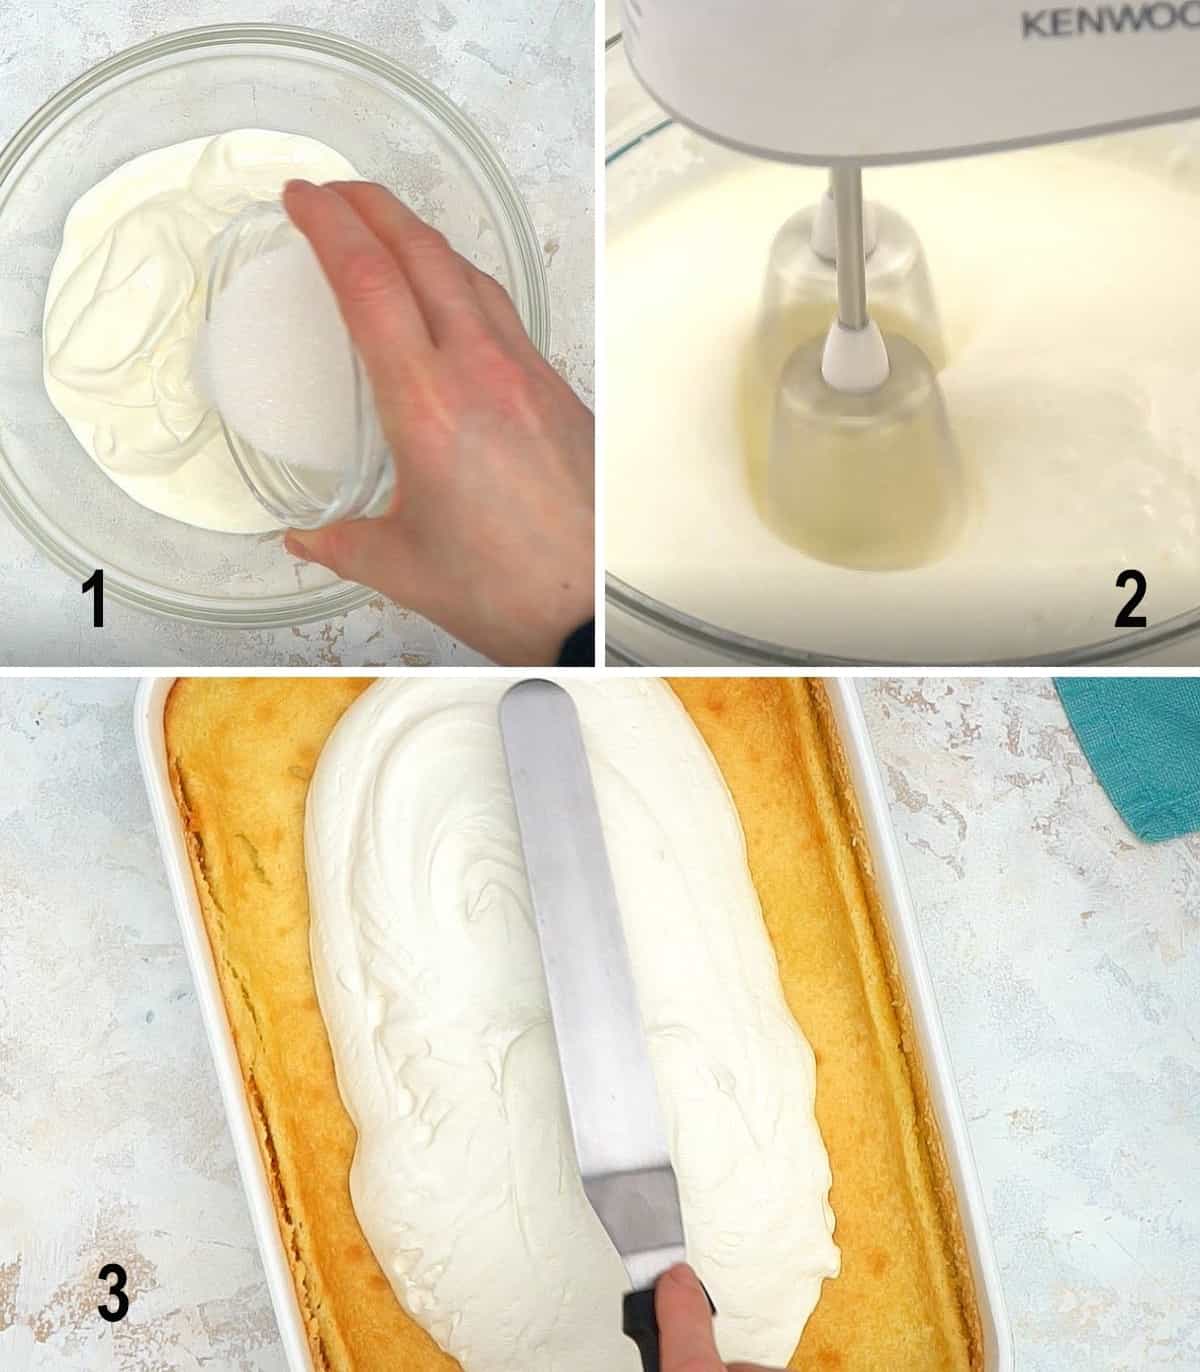 pouring sugar into sour cream, mixer beating sour cream, spreading topping on cake